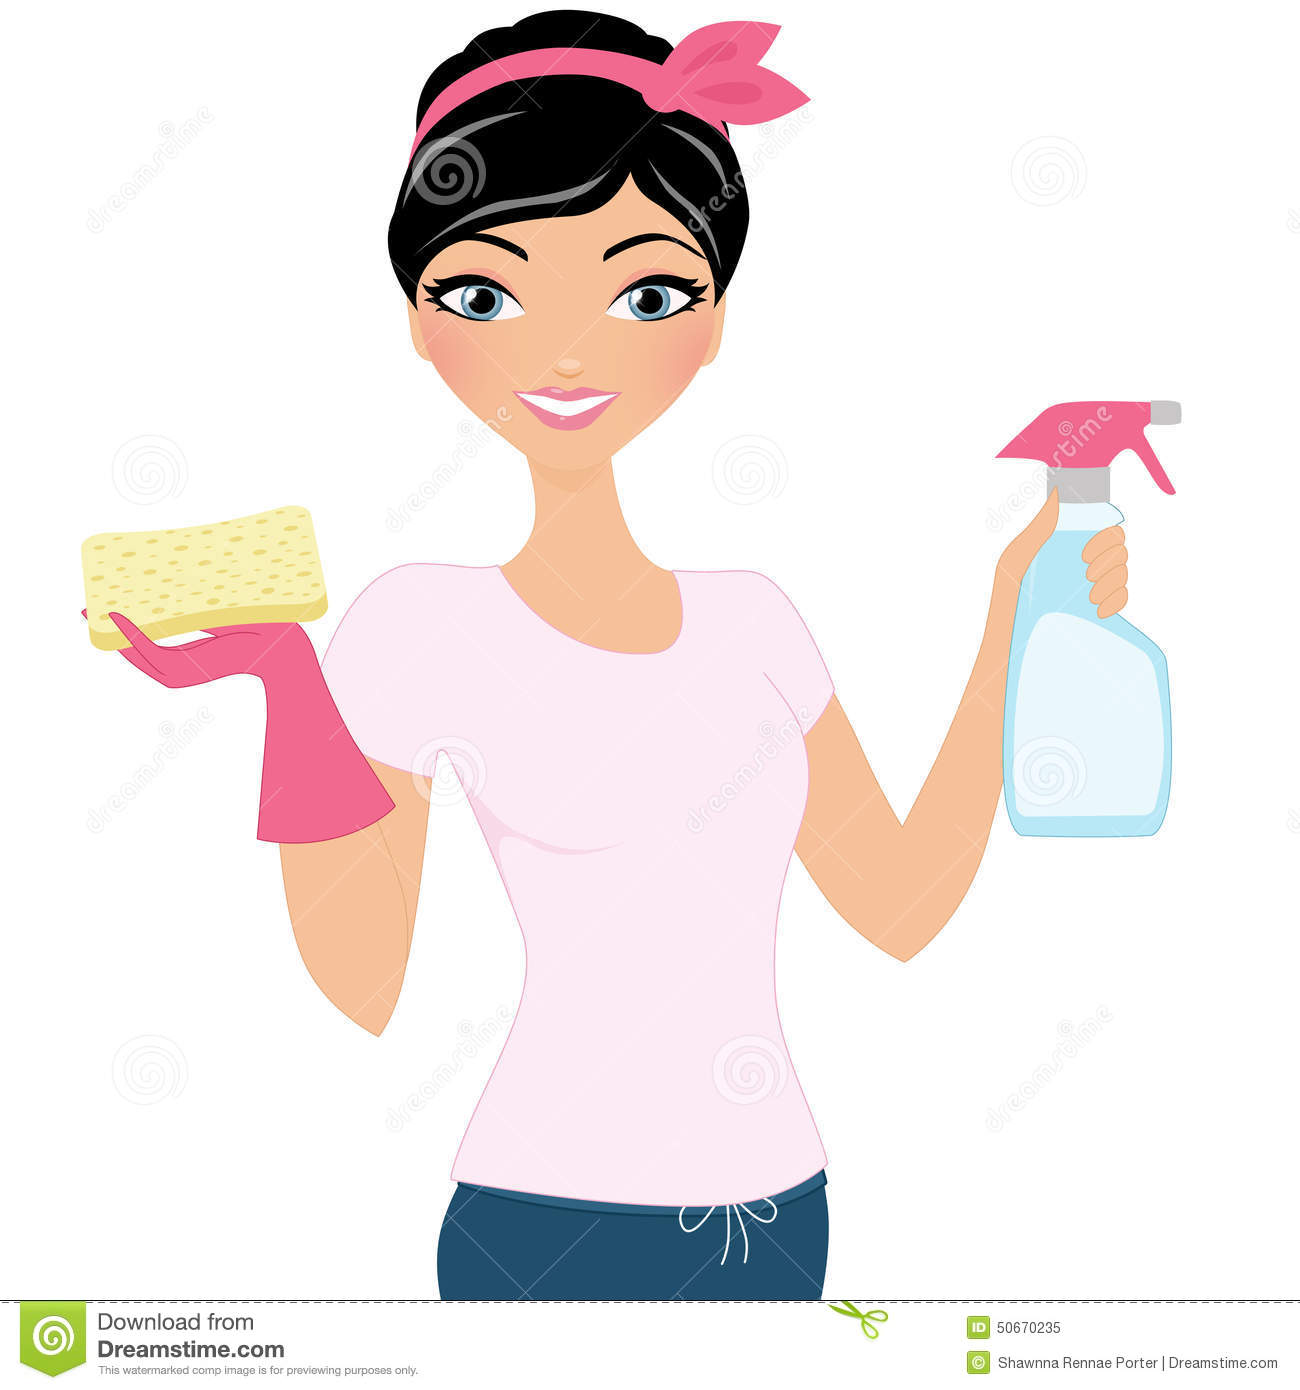 cleaning-woman-clipart-8.jpg